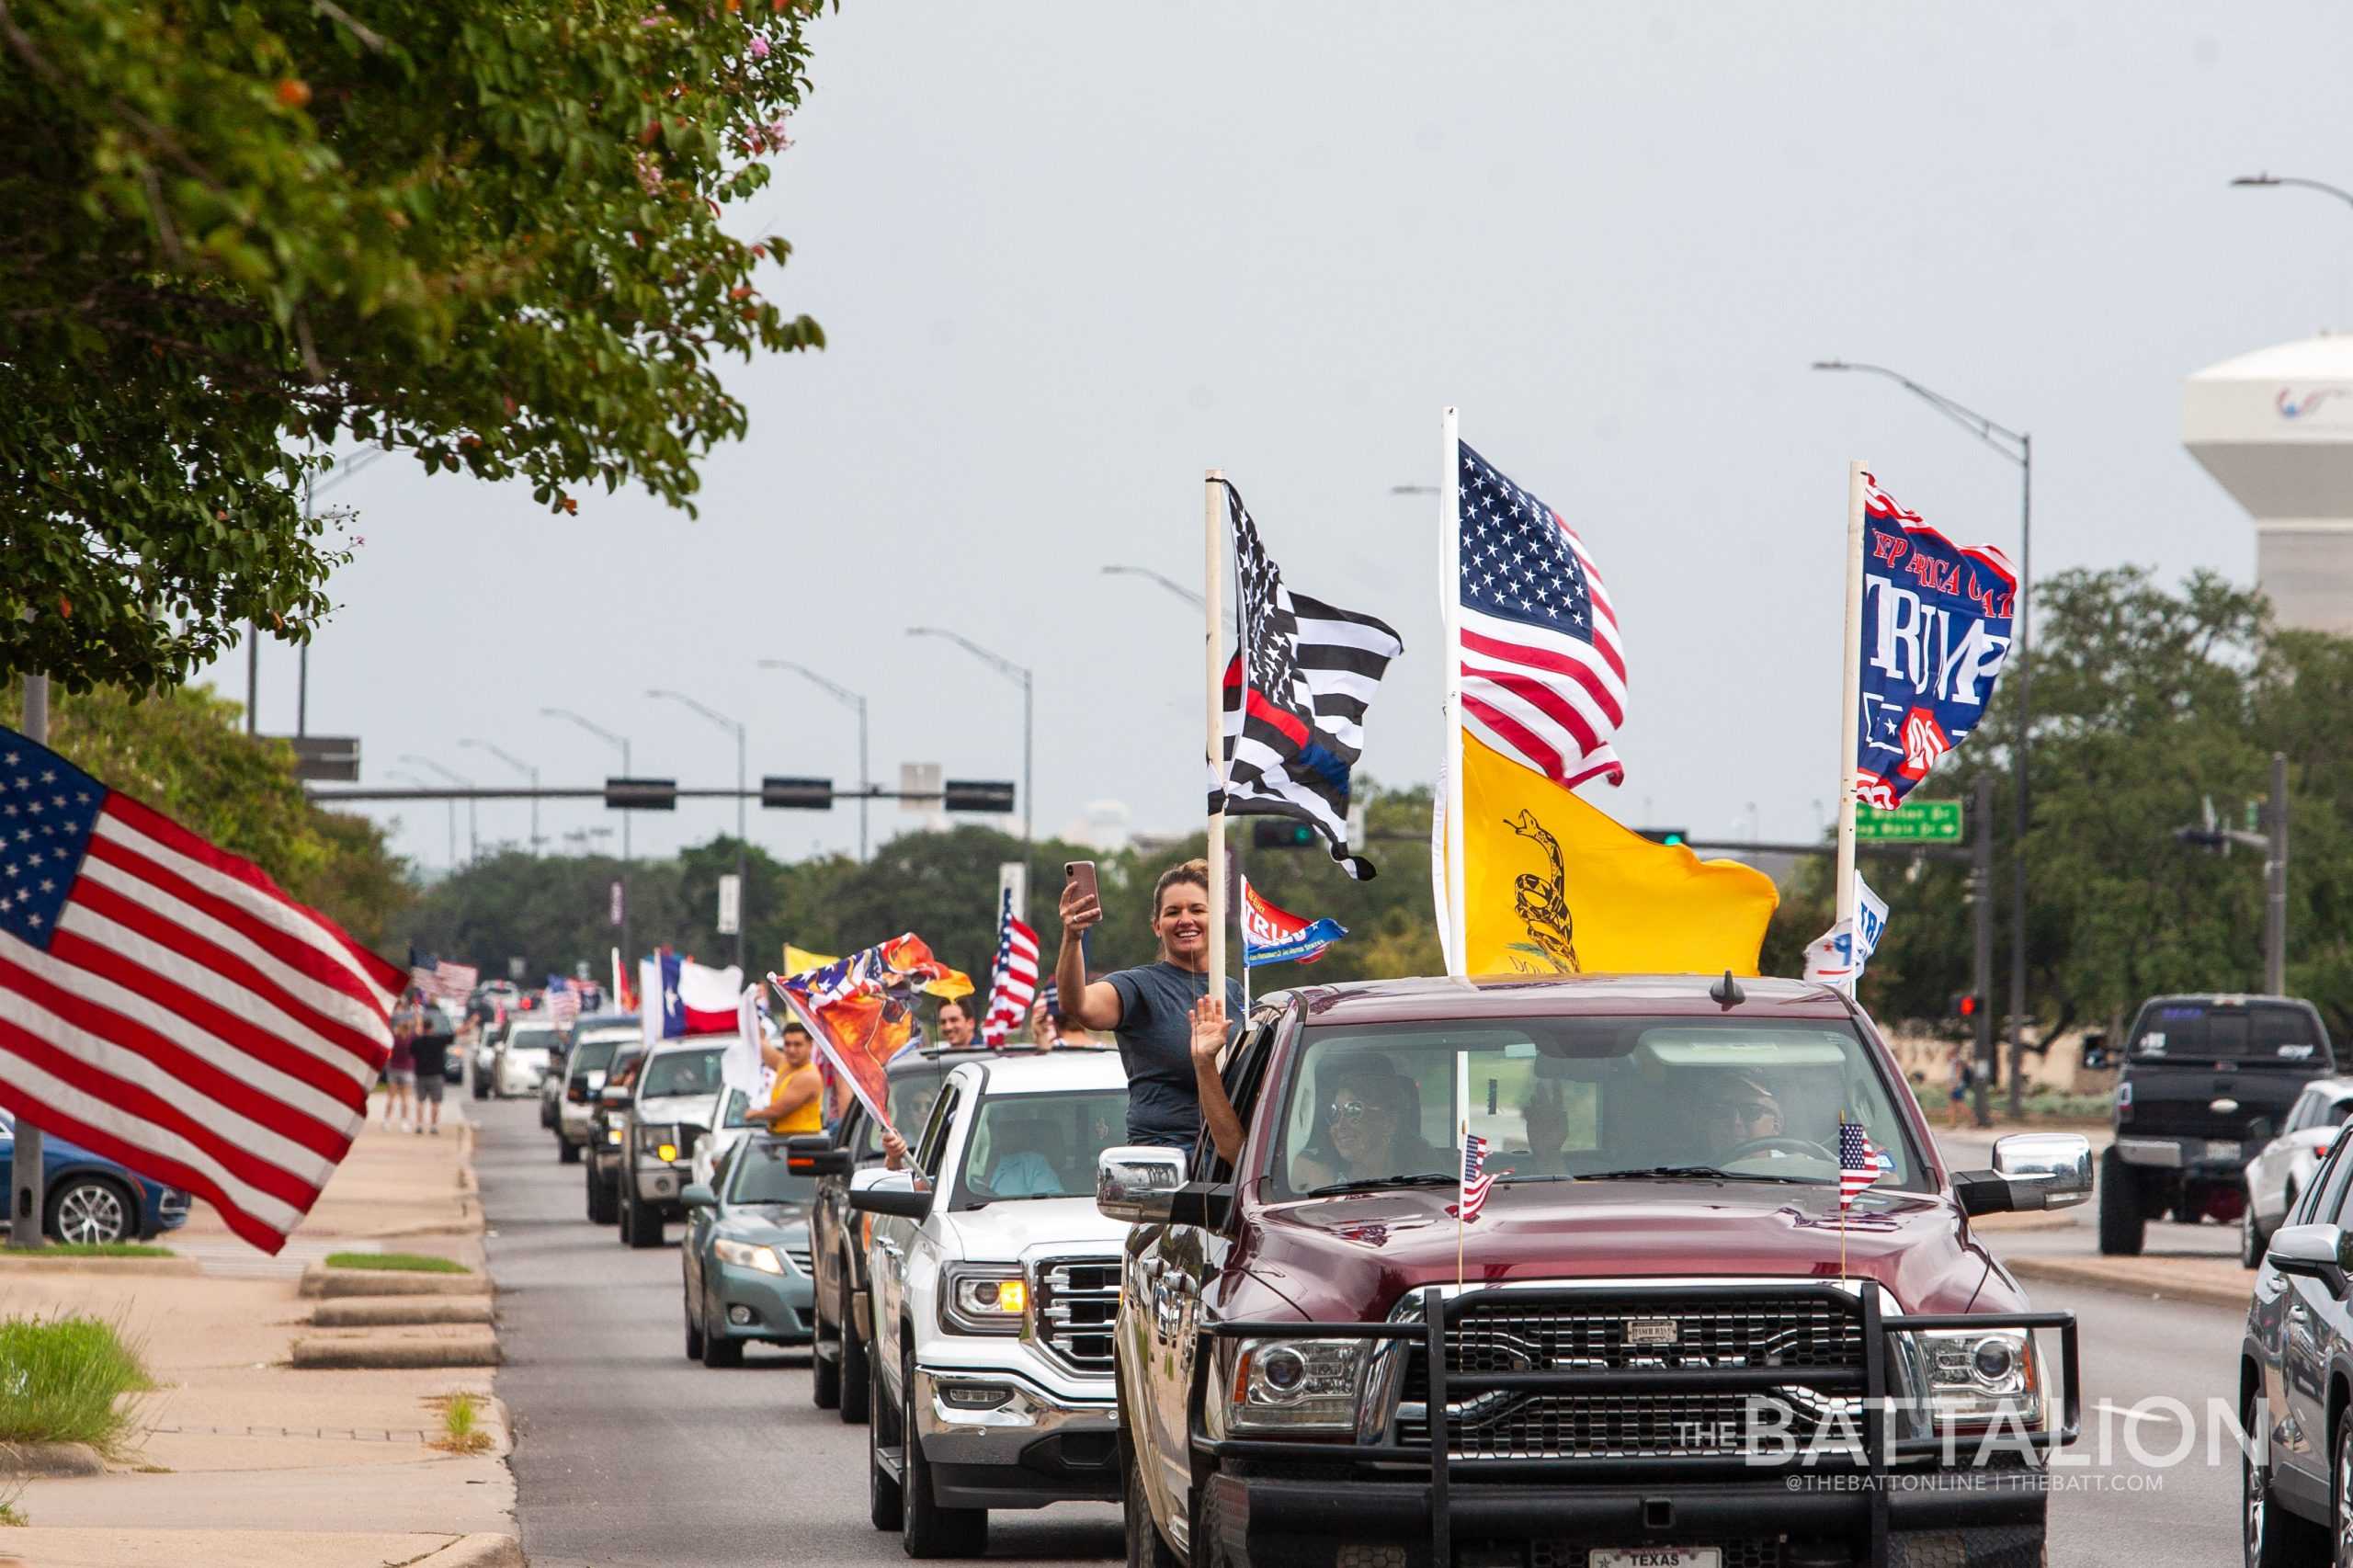 Over+100+cars+gather+for+Trump+parade+in+College+Station